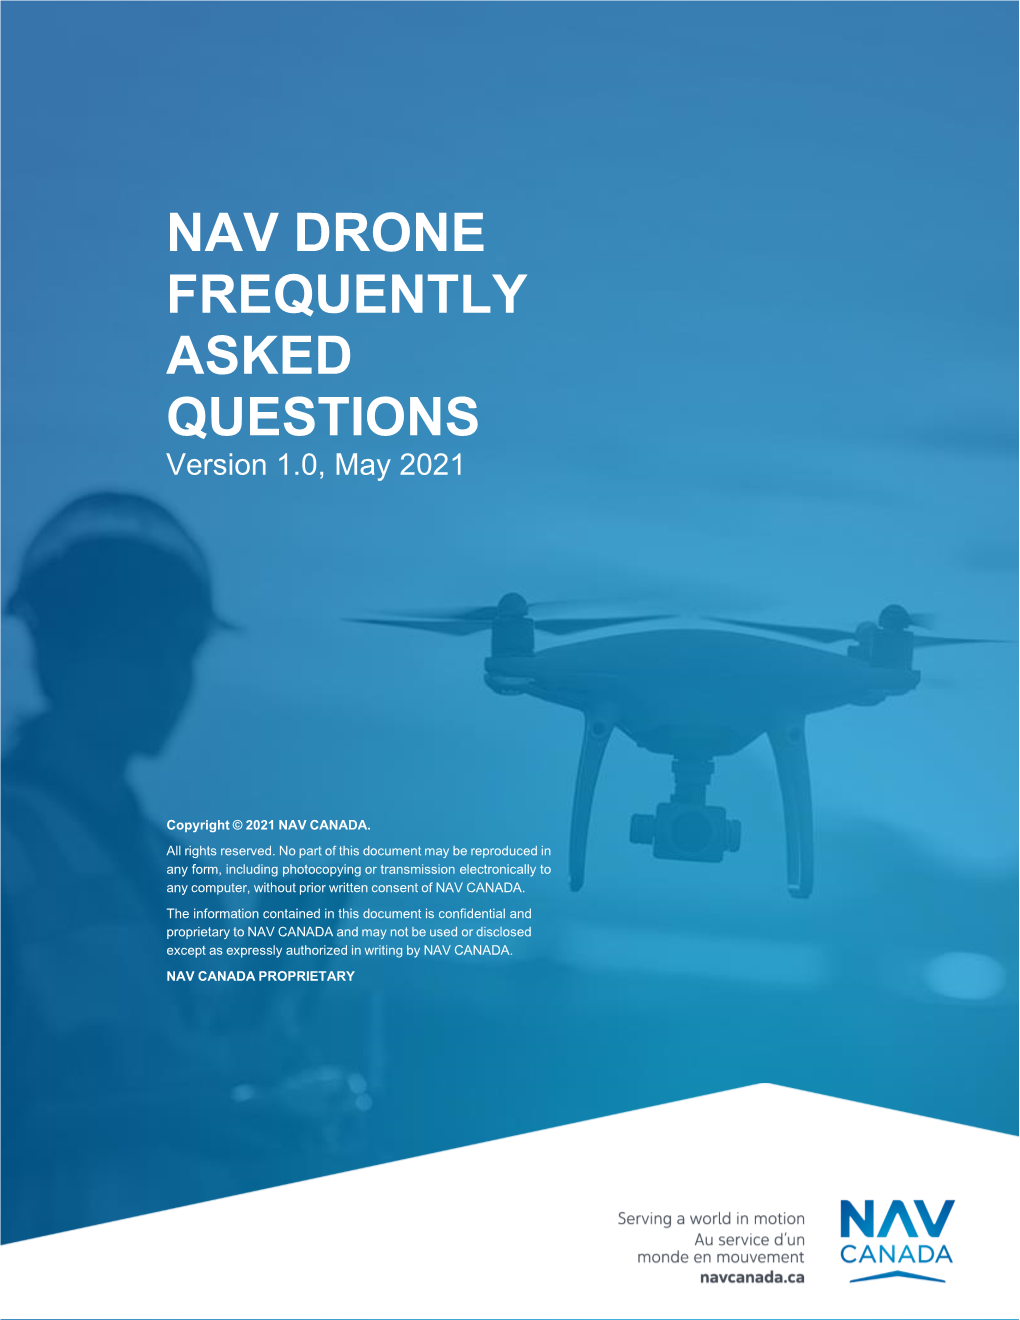 NAV DRONE FREQUENTLY ASKED QUESTIONS Version 1.0, May 2021